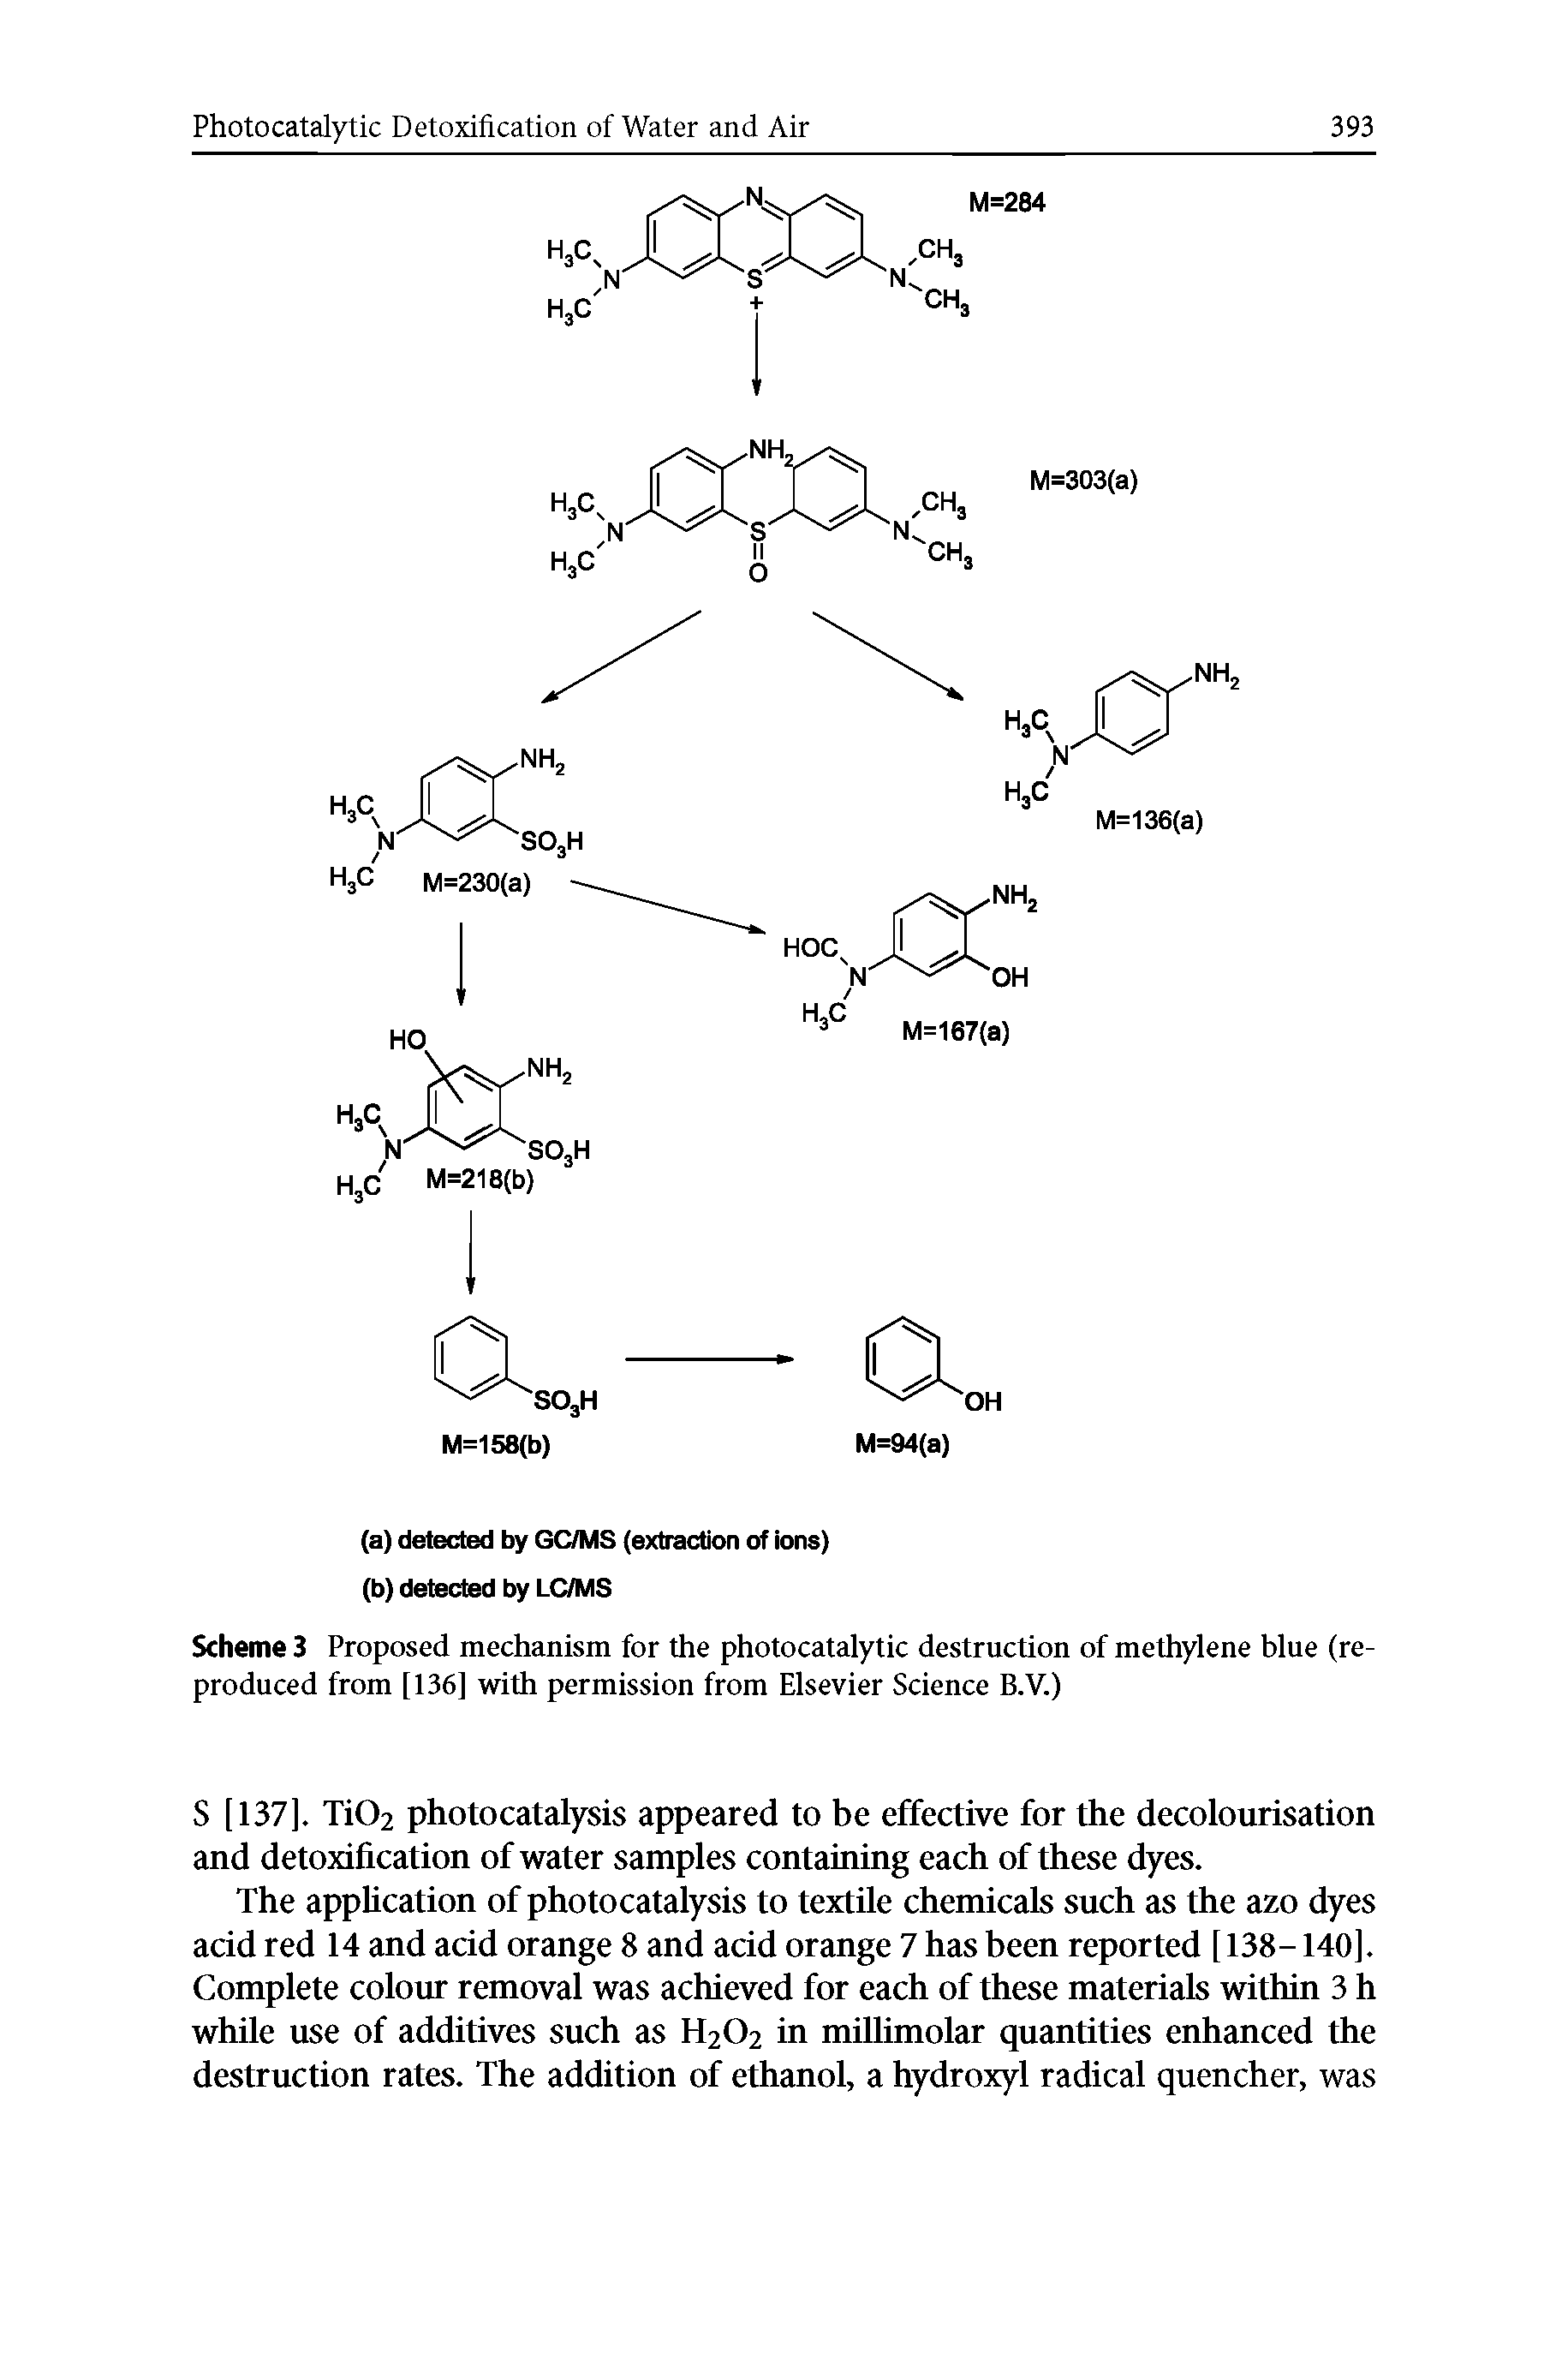 Scheme 3 Proposed mechanism for the photocatalytic destruction of methylene blue (reproduced from [136] with permission from Elsevier Science B.V.)...